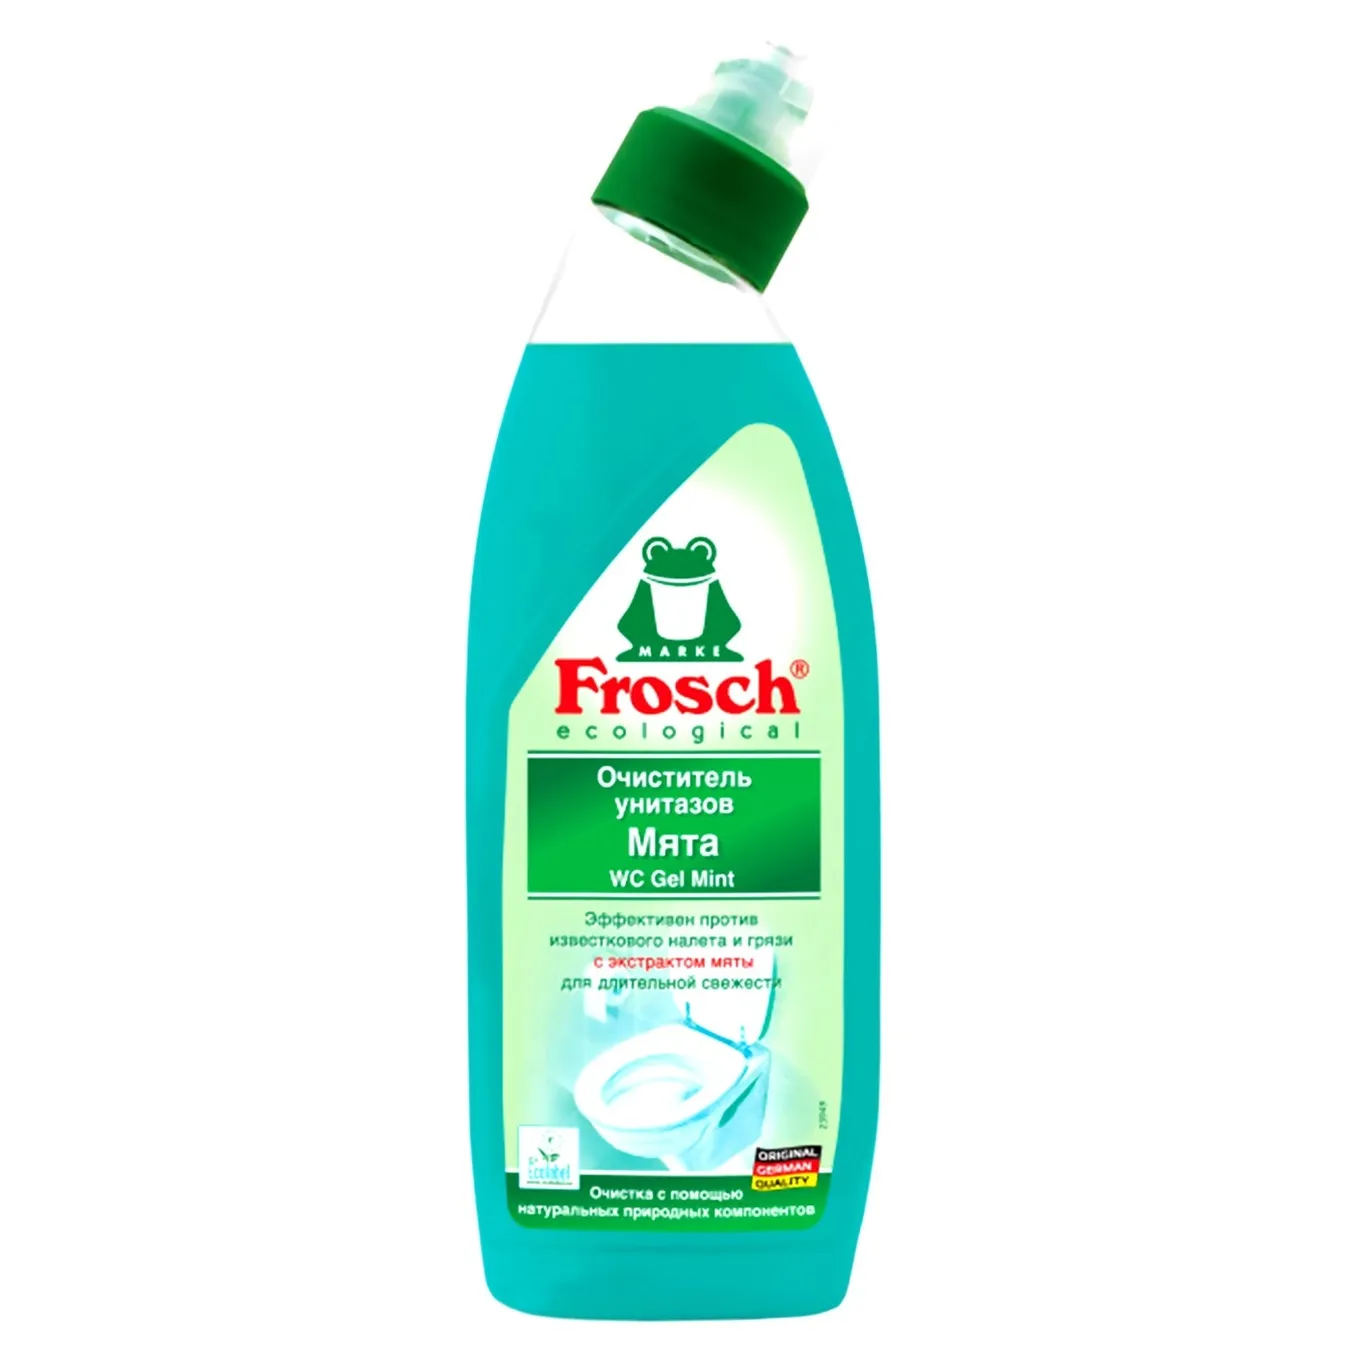 Frosch Mint Toilet Bowl Cleaner 750ml